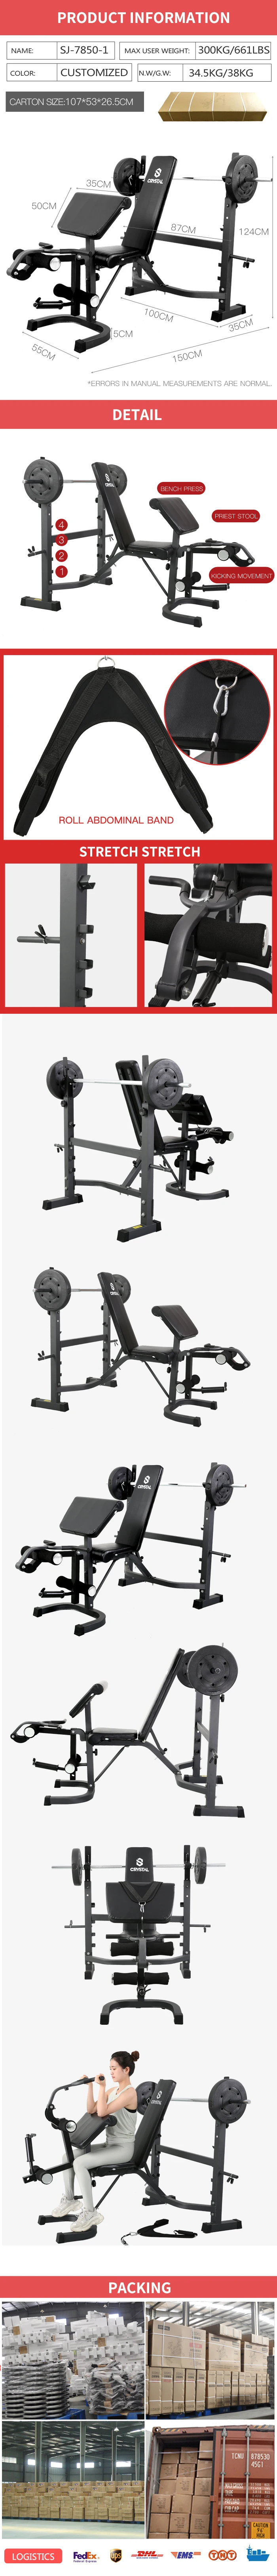 SJ-7850-1 Chinese Manufacturer Steel Weight Bench Adjustable Home Gym Equipment Weight Lifting